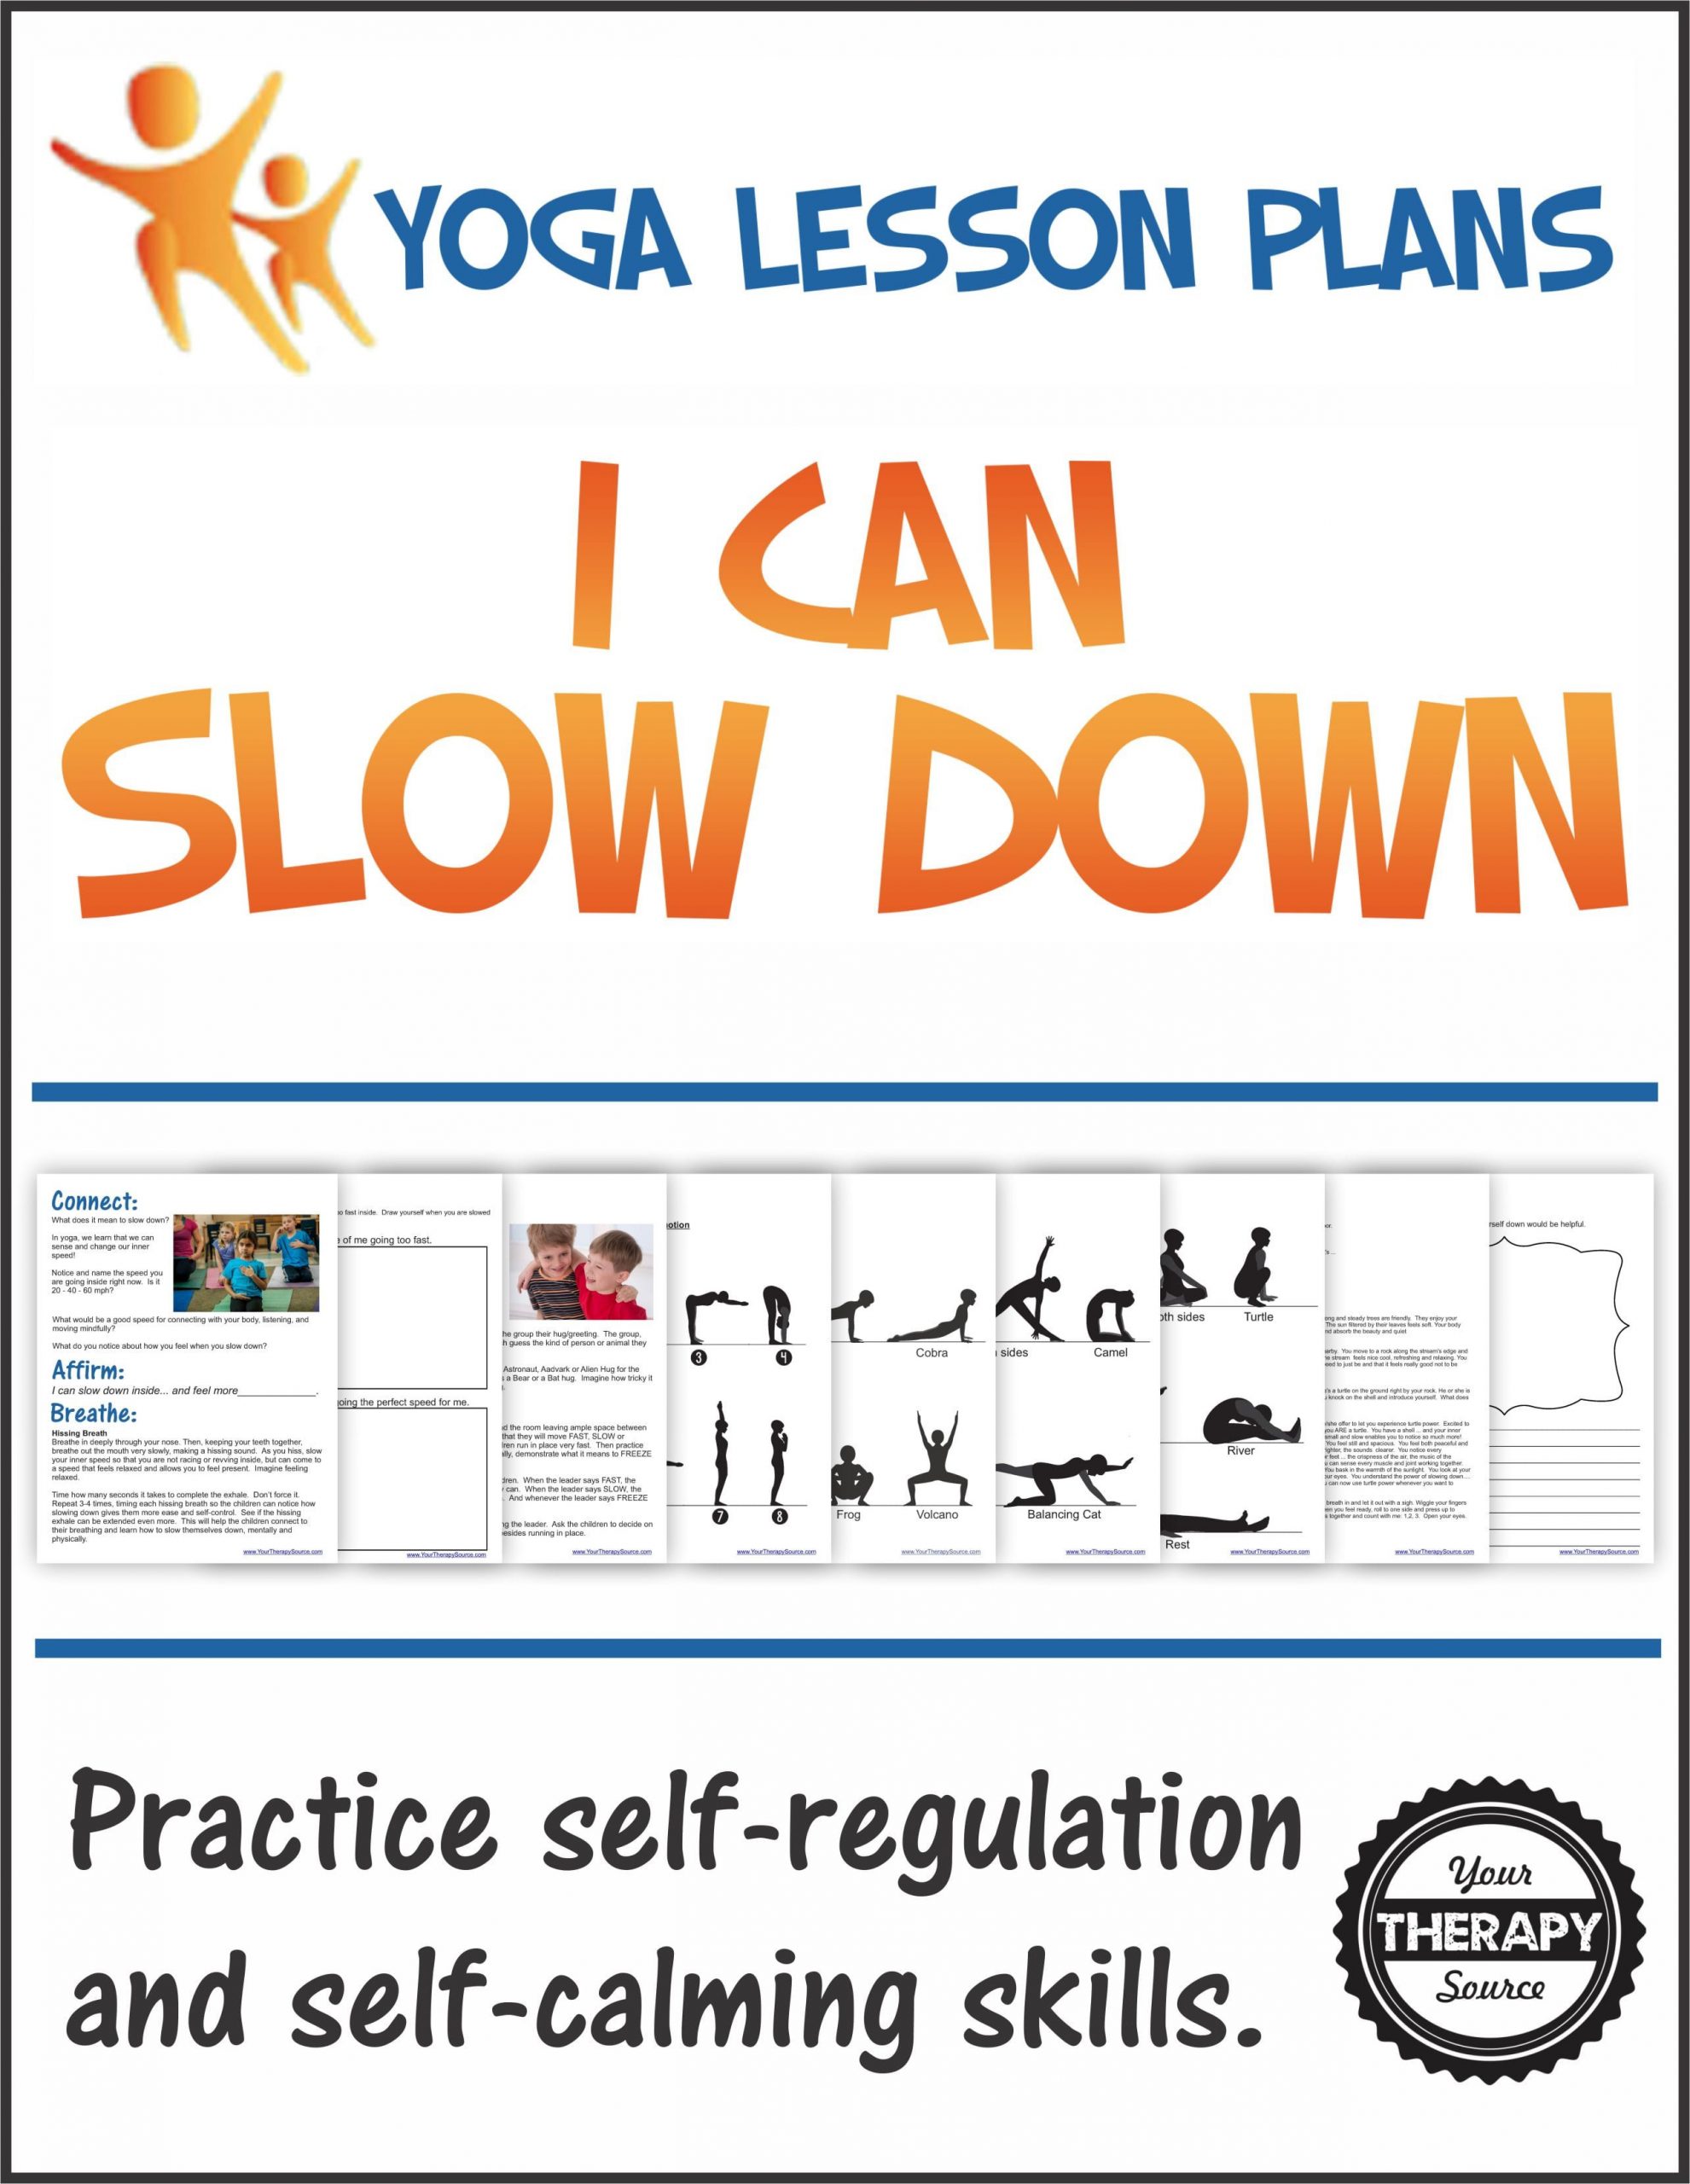 Yoga Lesson Plan Yoga Lesson Plan I Can Slow Down Your therapy source